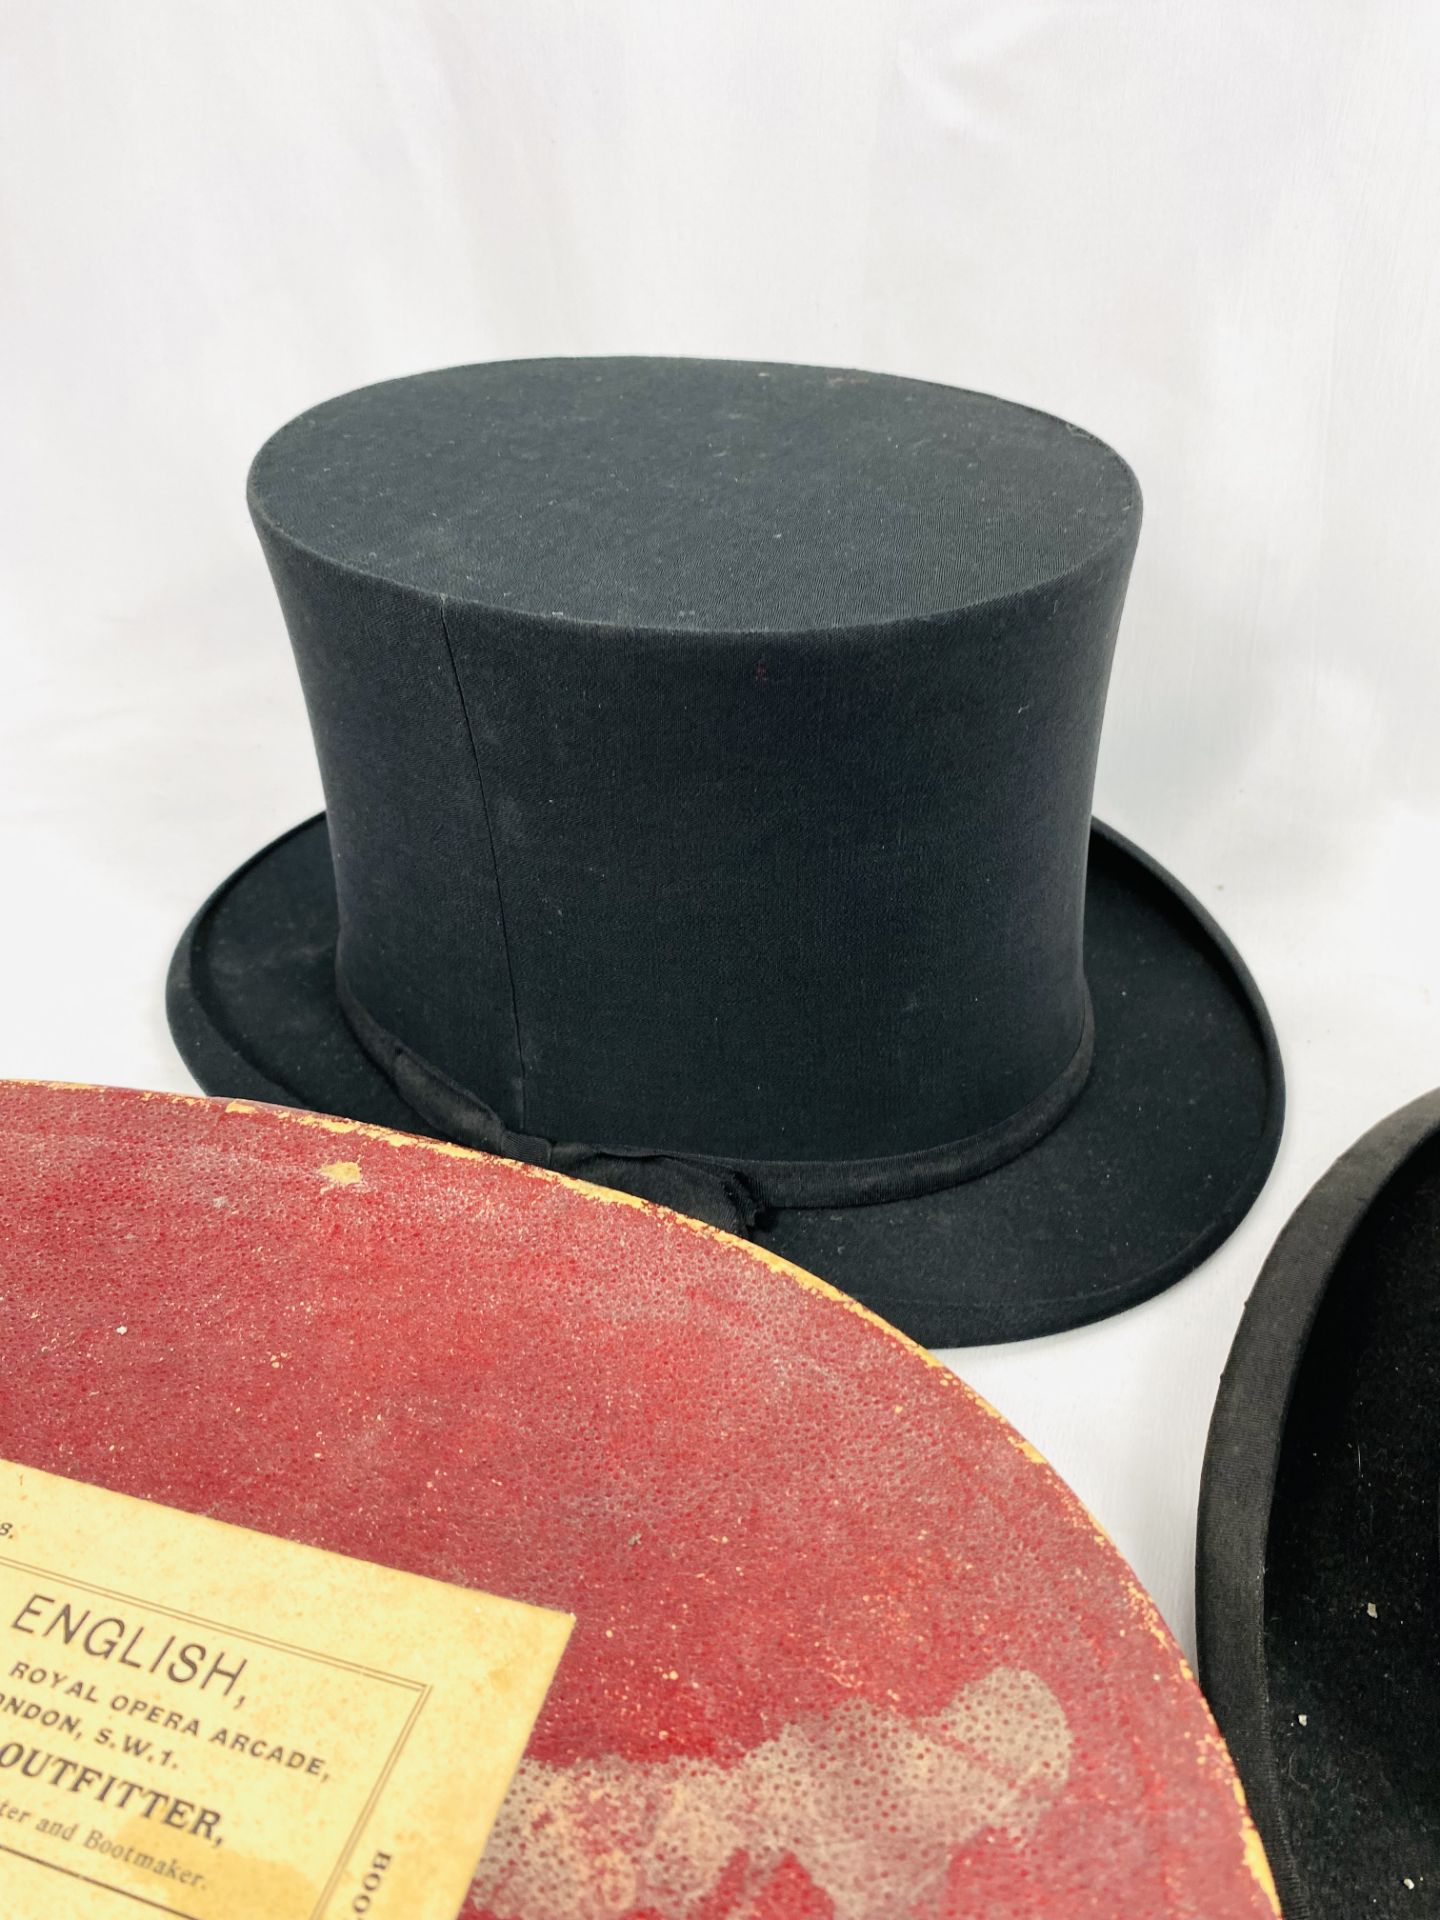 Scott & Co bowler hat together with a collapsible opera hat - Image 3 of 5